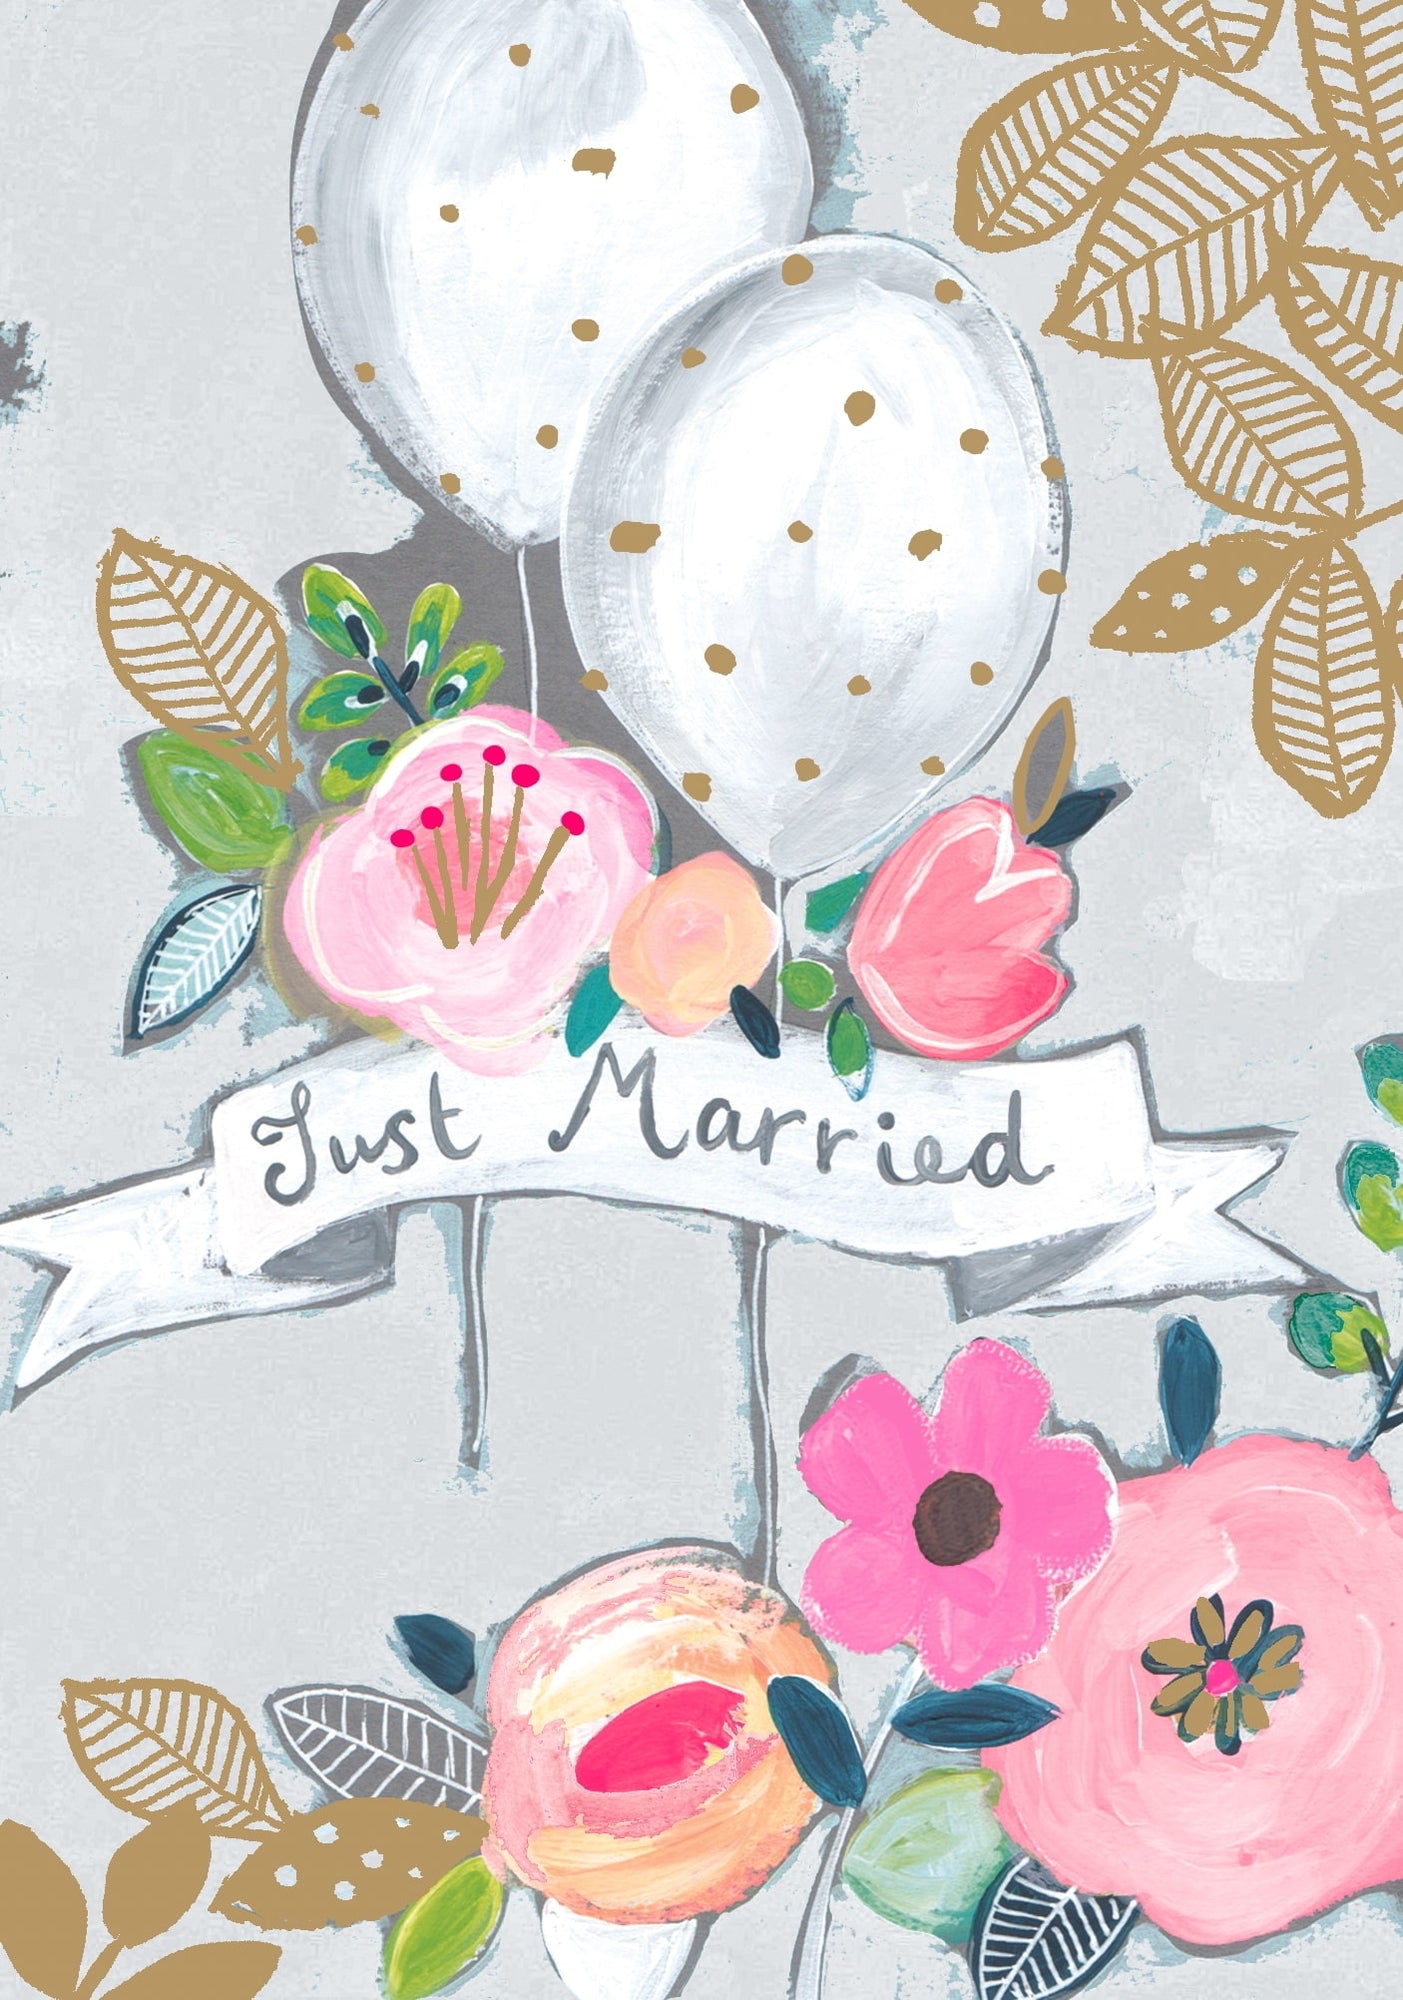 Just Married Banner Wedding Card from Penny Black